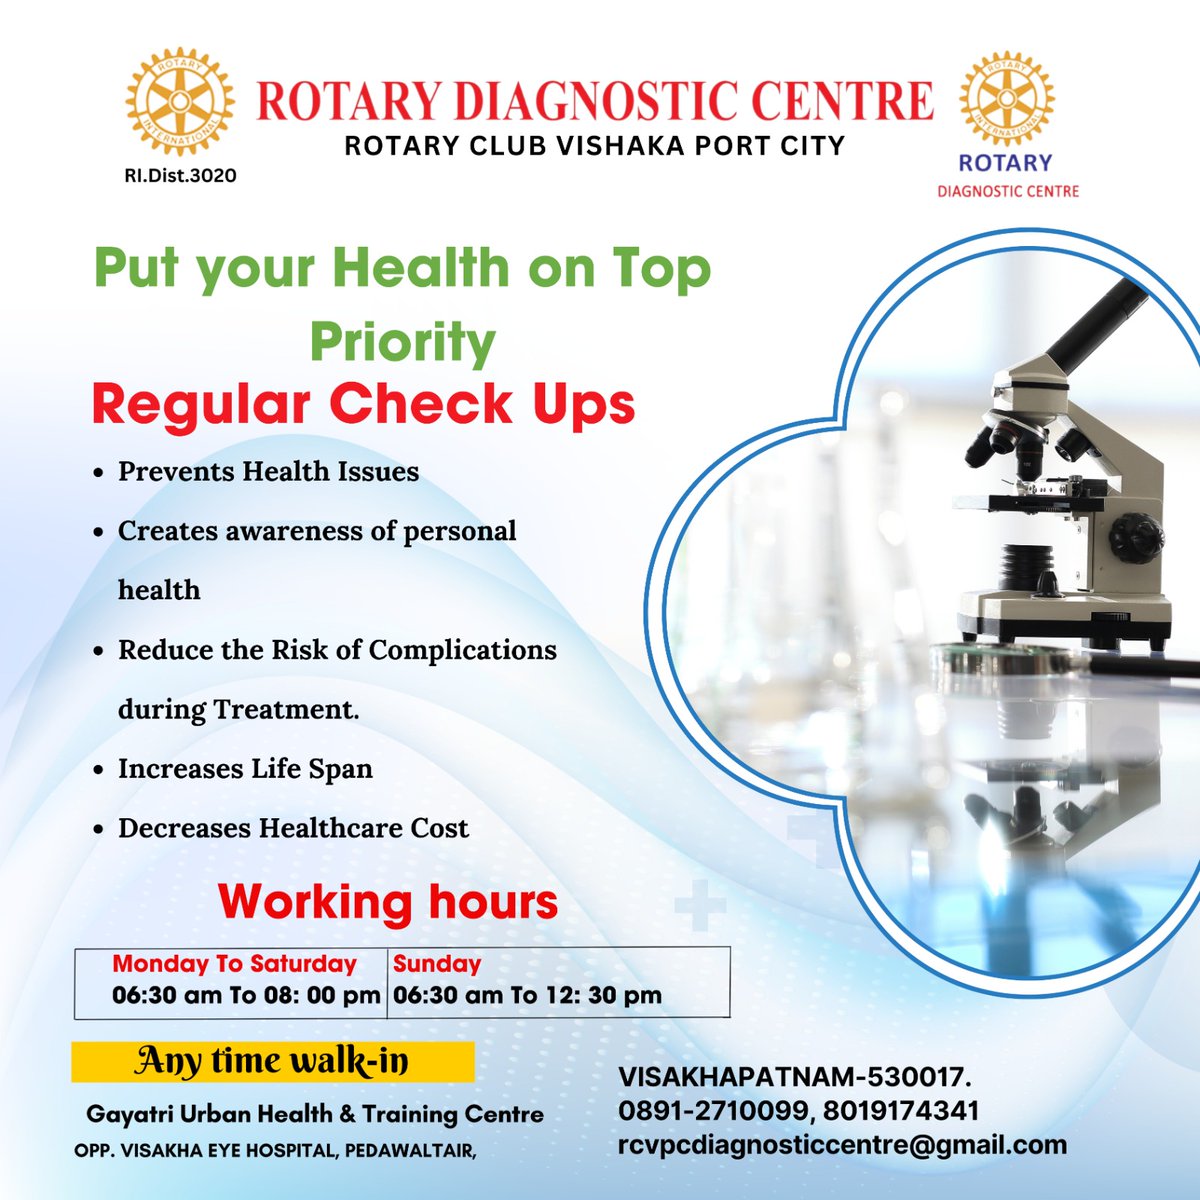 Get tested the right way for precise results at Rotary Diagnostic Centre. Your health is our priority!
🕒 Working Hours:
Monday To Saturday: 06:30 am To 08:00 pm
Sunday: 06:30 am To 12:30 pm
🚶‍♂️ Anytime walk-in welcome!
#RotaryDiagnosticCentre #DiagnosticCenter #HealthScreening